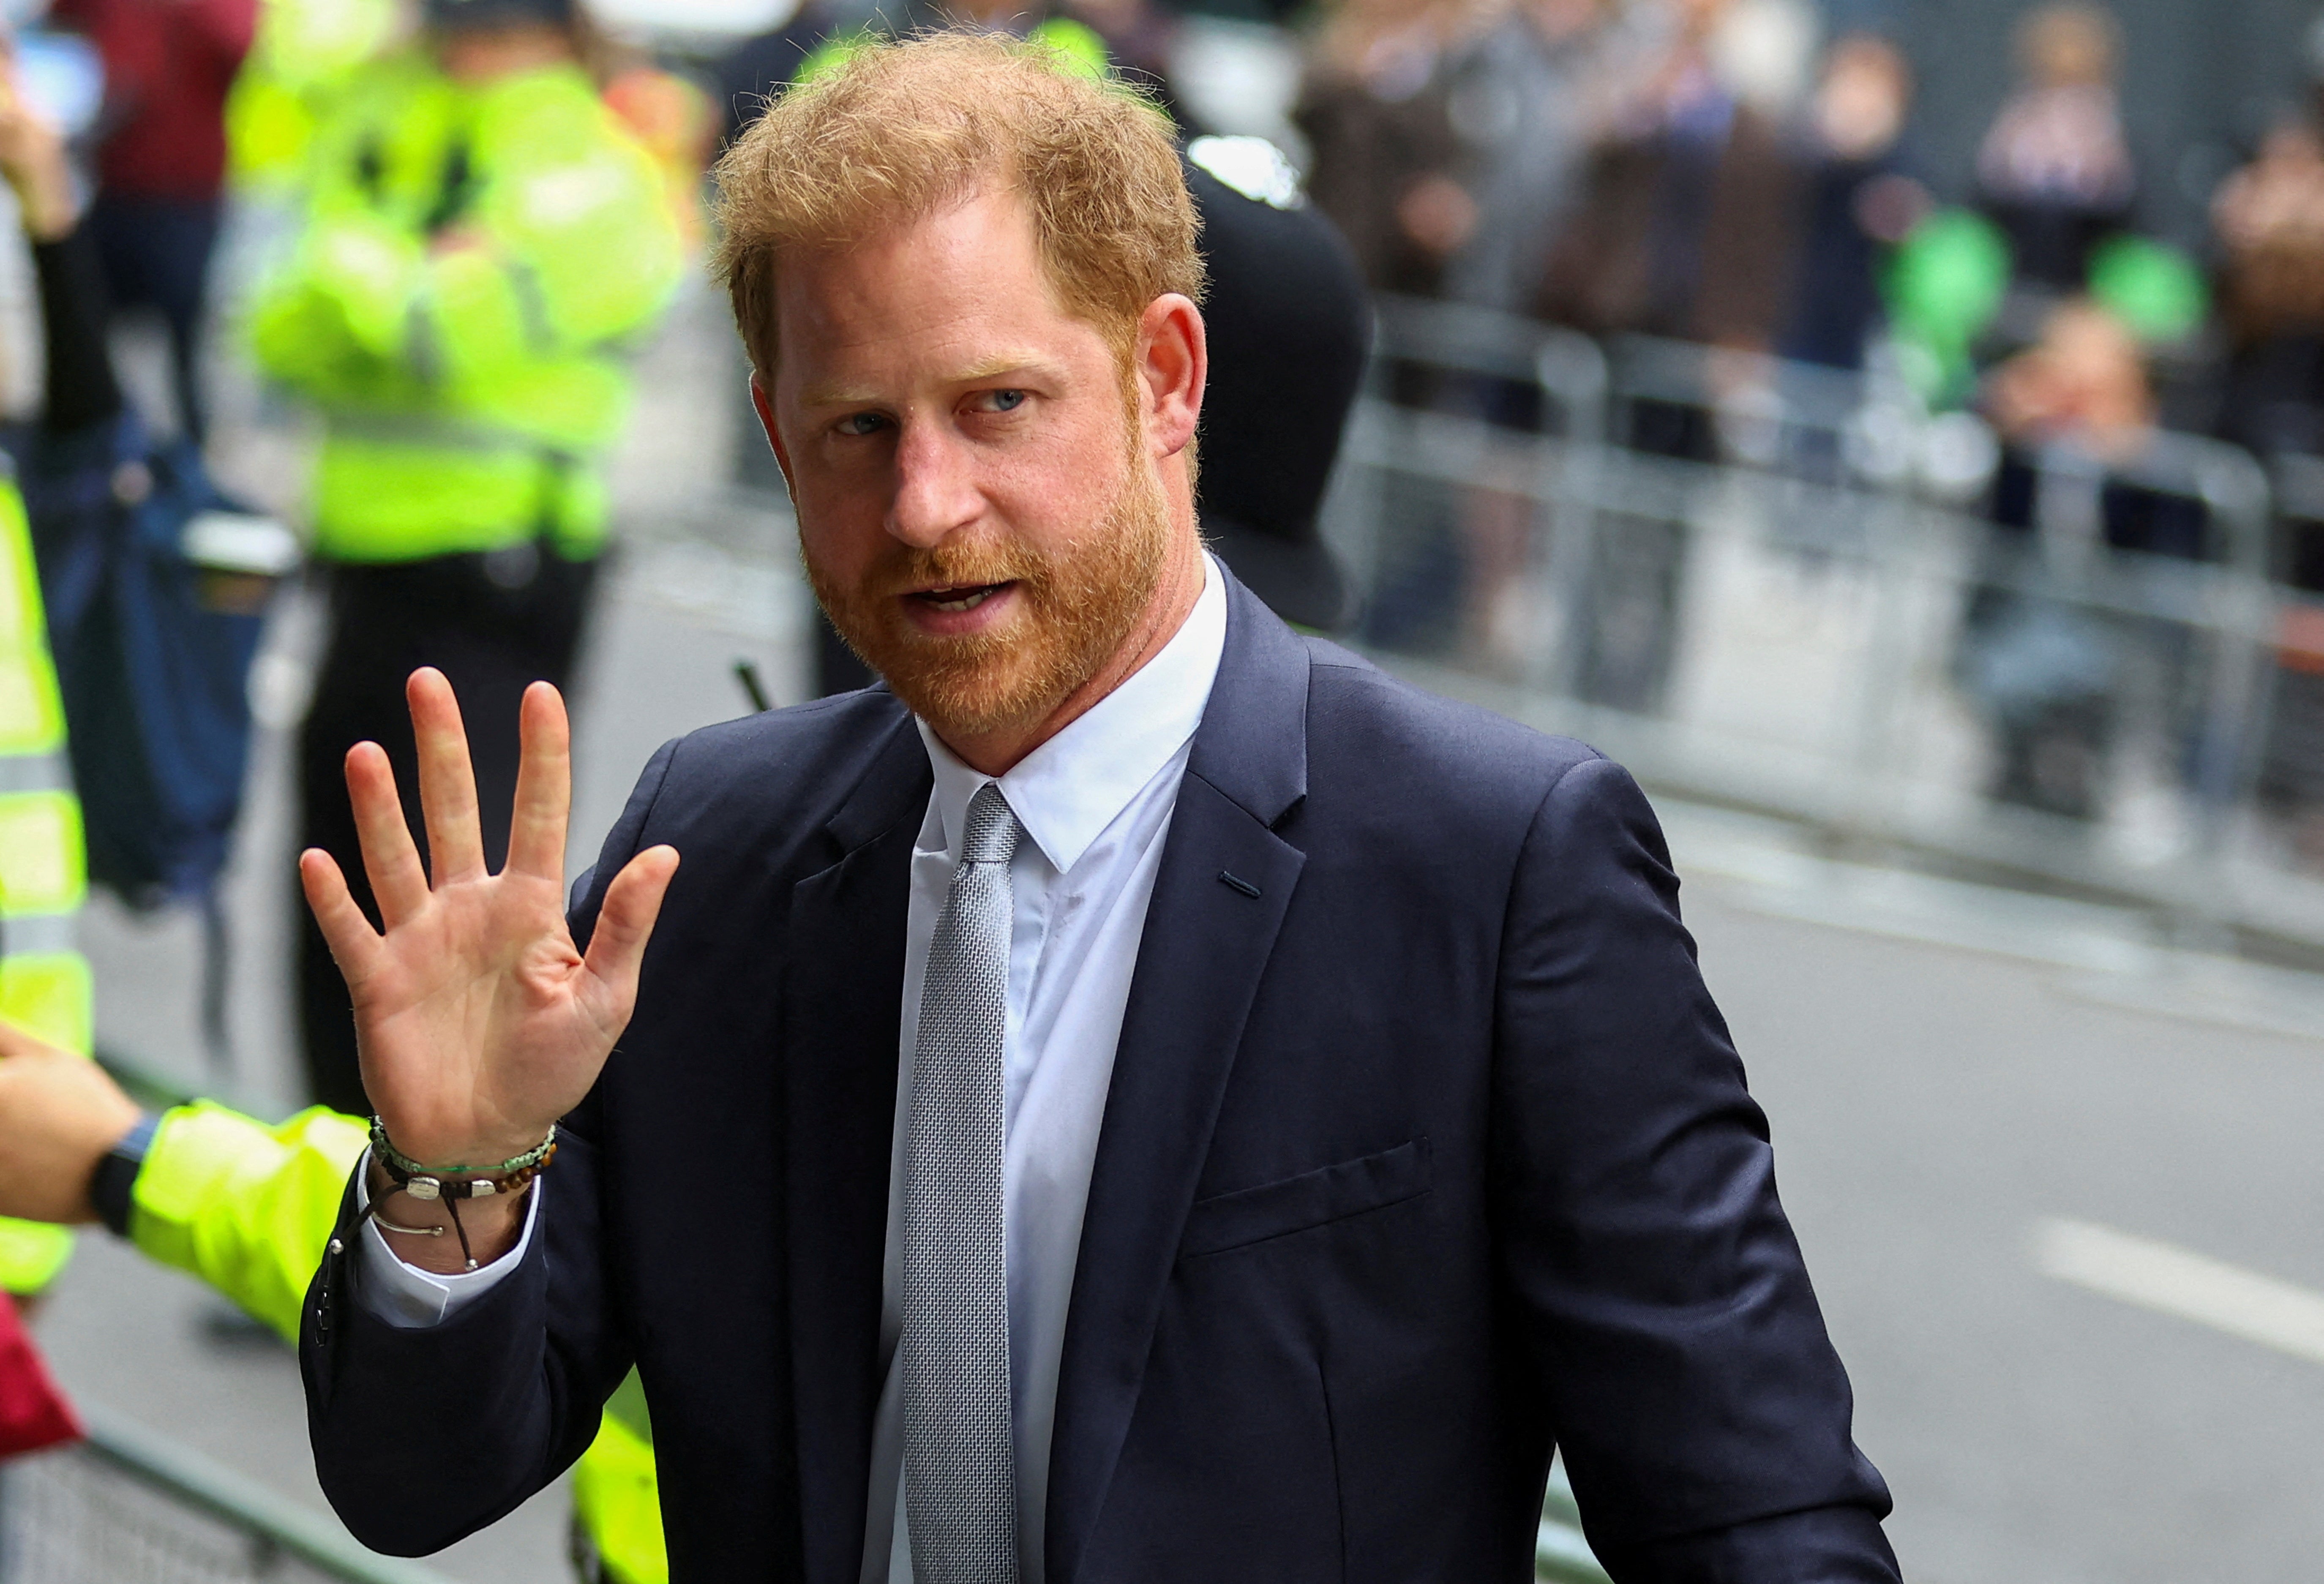 Prince Harry, who is based in California, is expected to return to the UK to visit his father this week